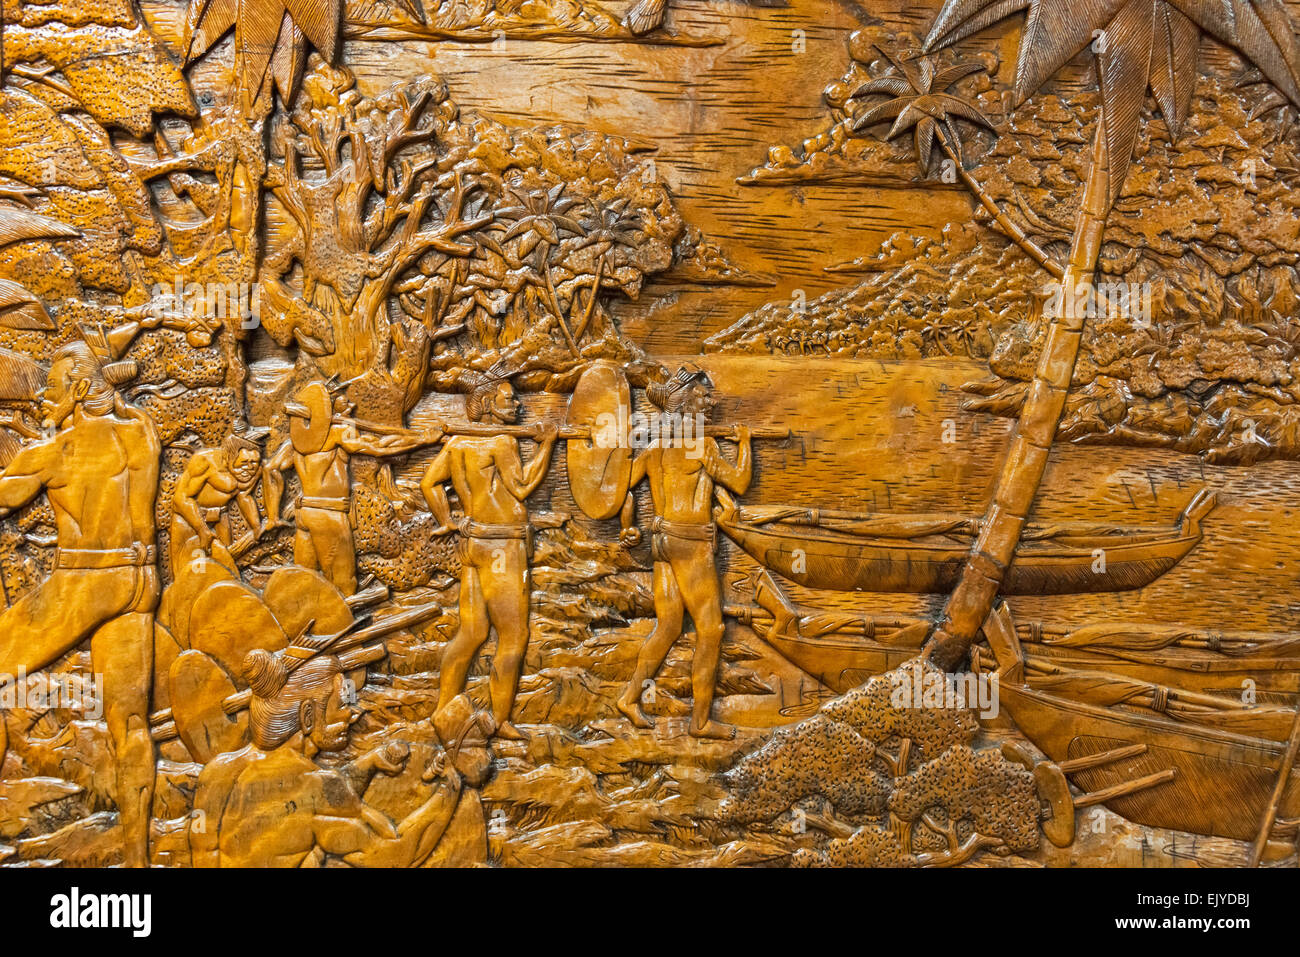 Wood carving depicting local life, Yap Island, Federated States of Micronesia Stock Photo